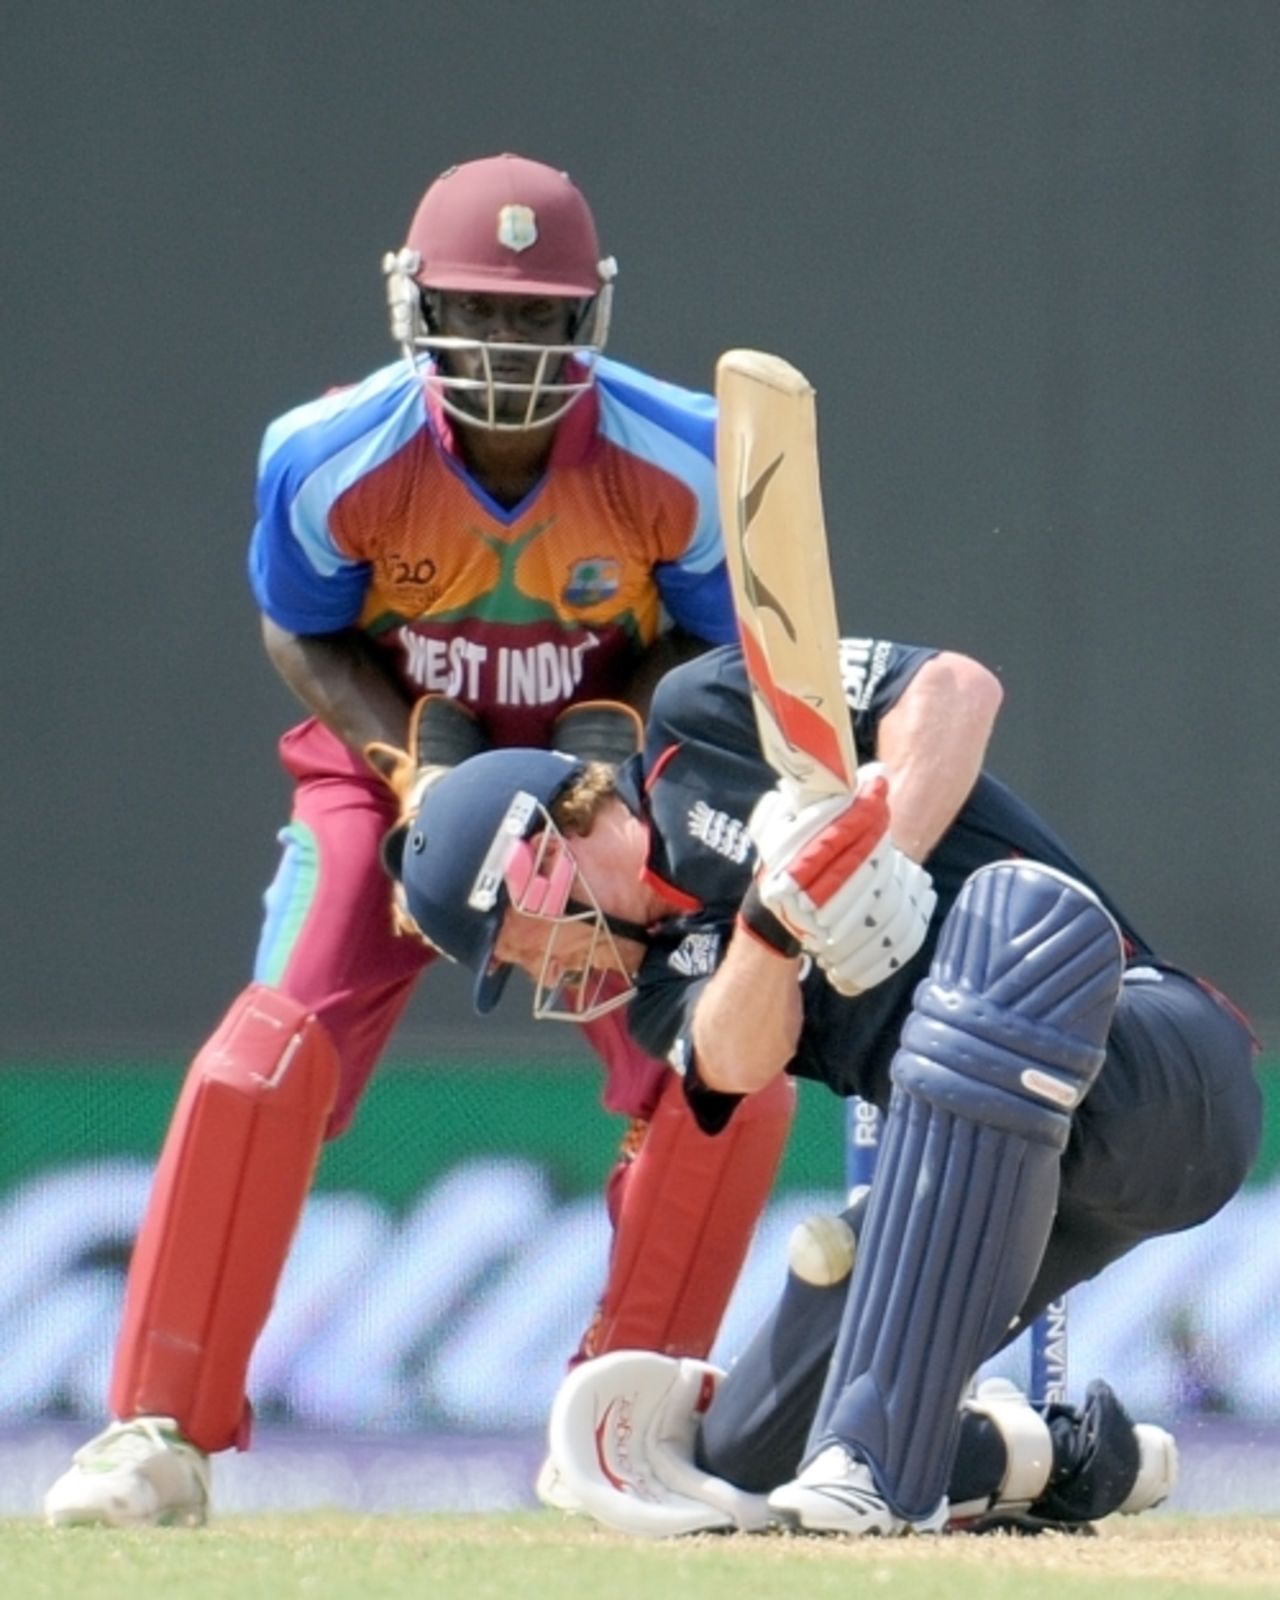 Paul Collingwood attempts a scoop shot but is struck a painful blow on the knee, West Indies v England, World Twenty20, Guyana, May 3, 2010